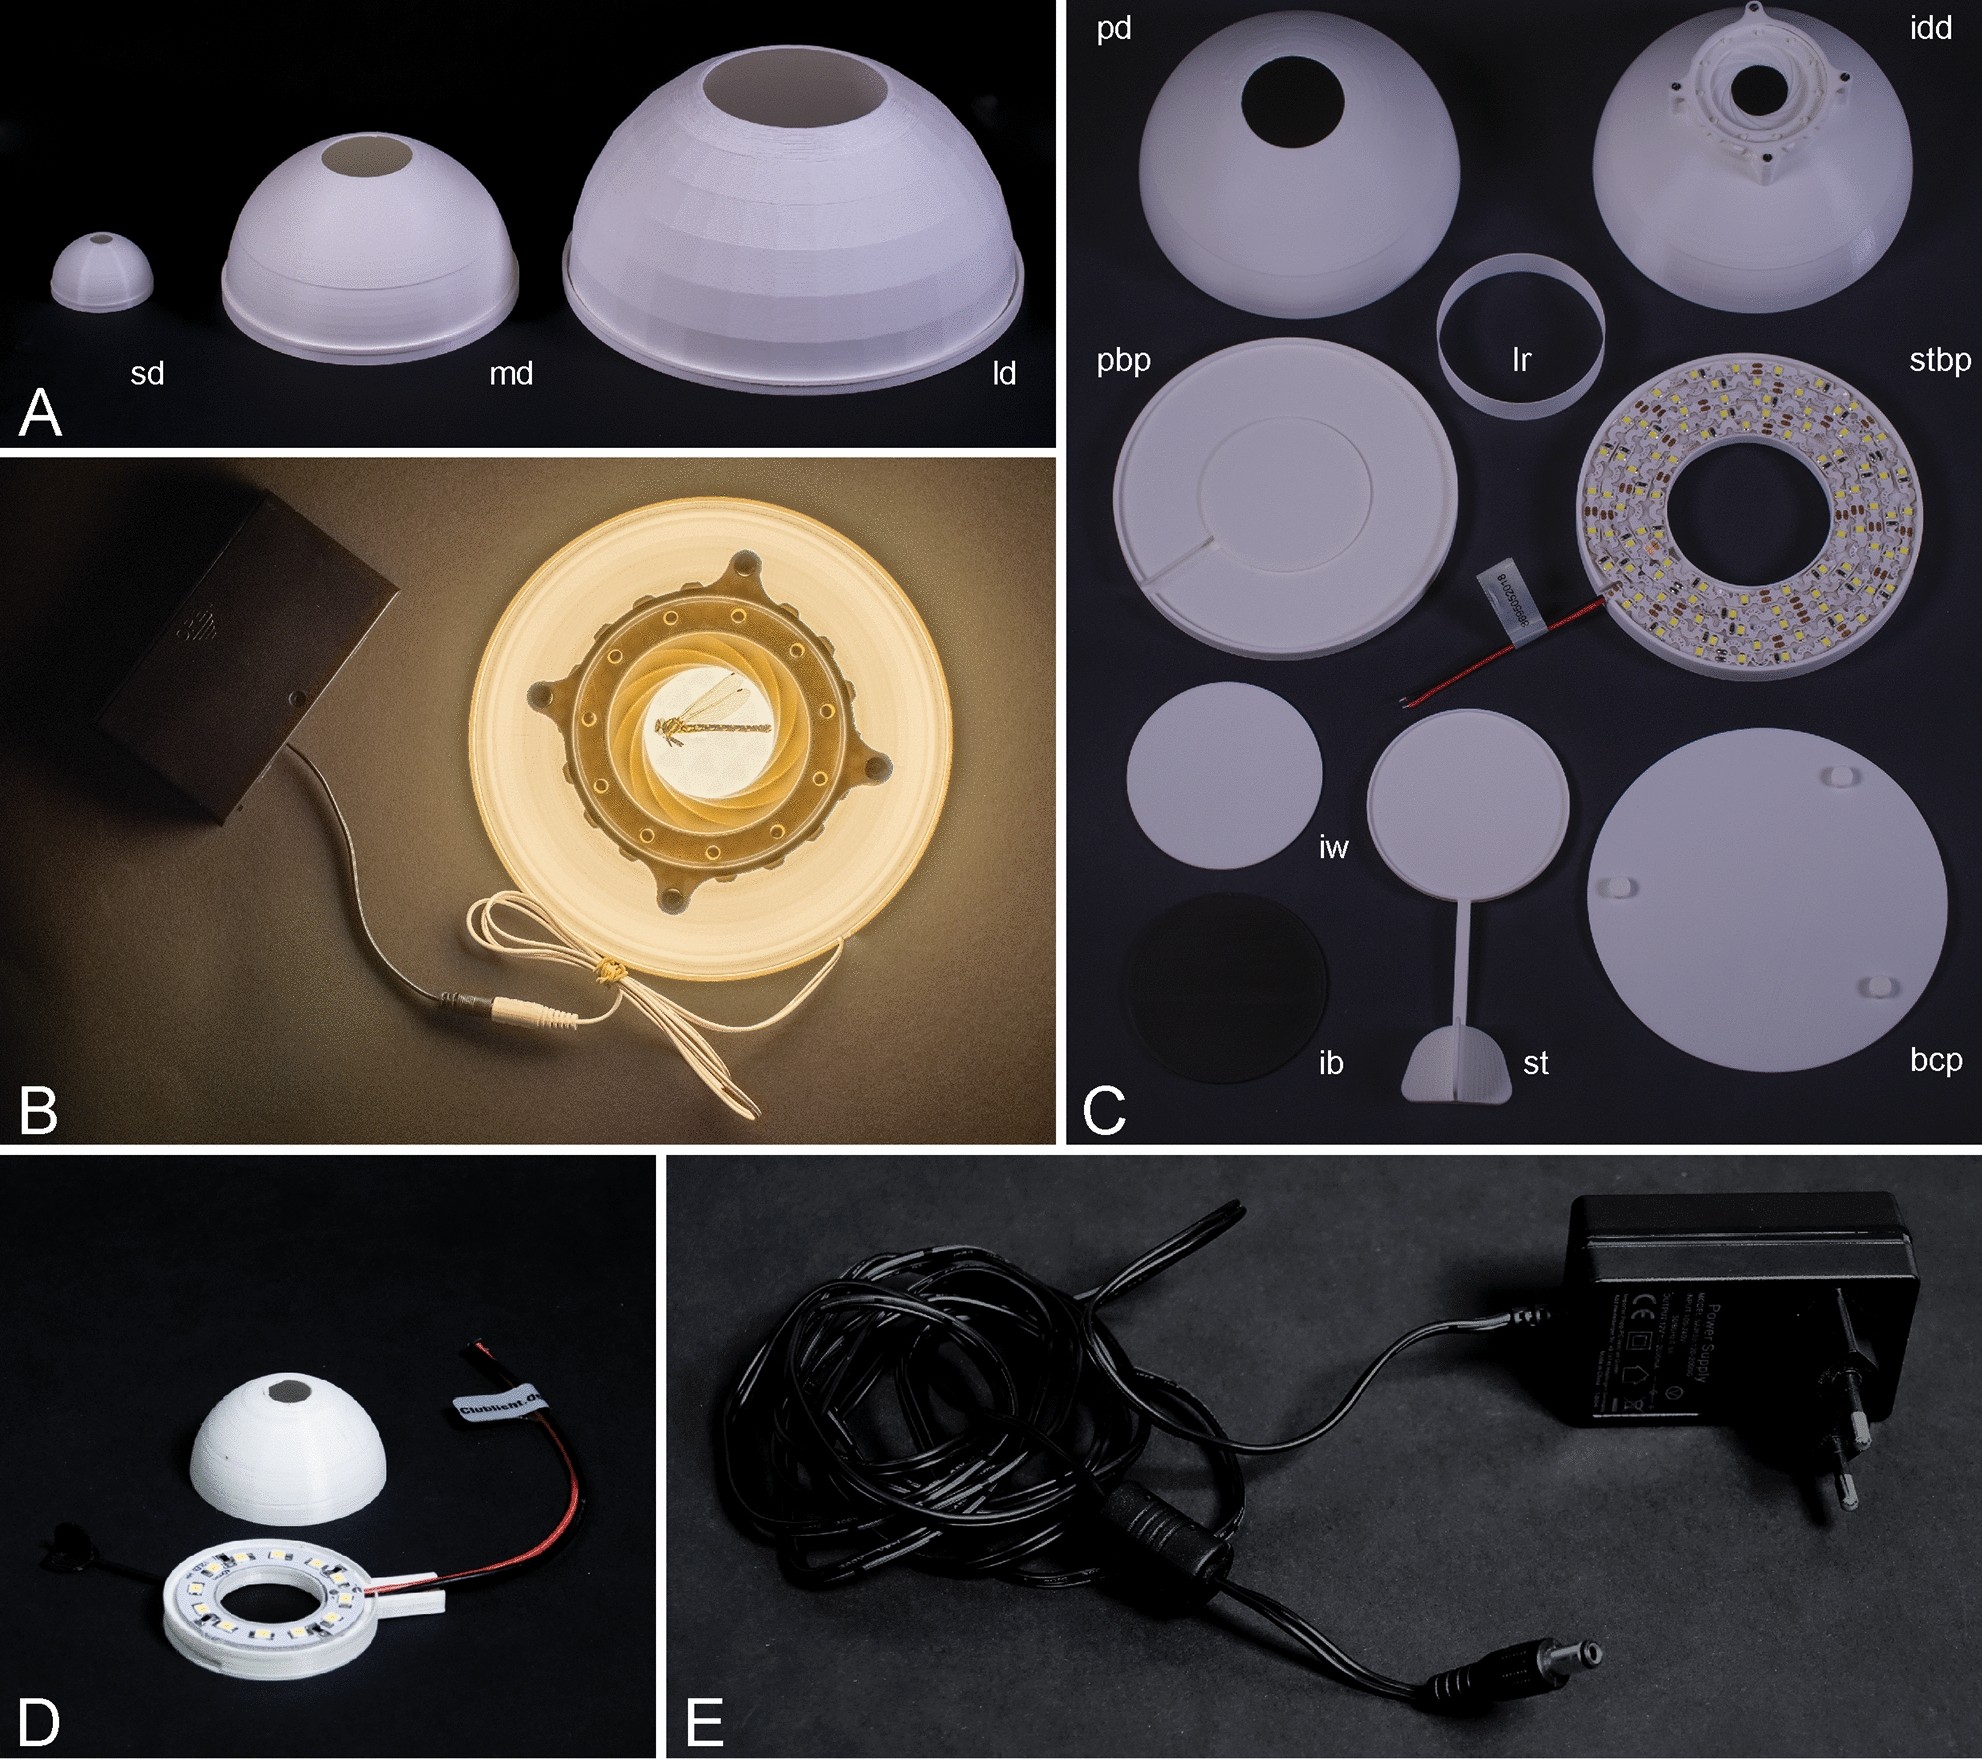 Illuminating nature's beauty: modular, scalable and low-cost LED dome  illumination system using 3D-printing technology | Scientific Reports